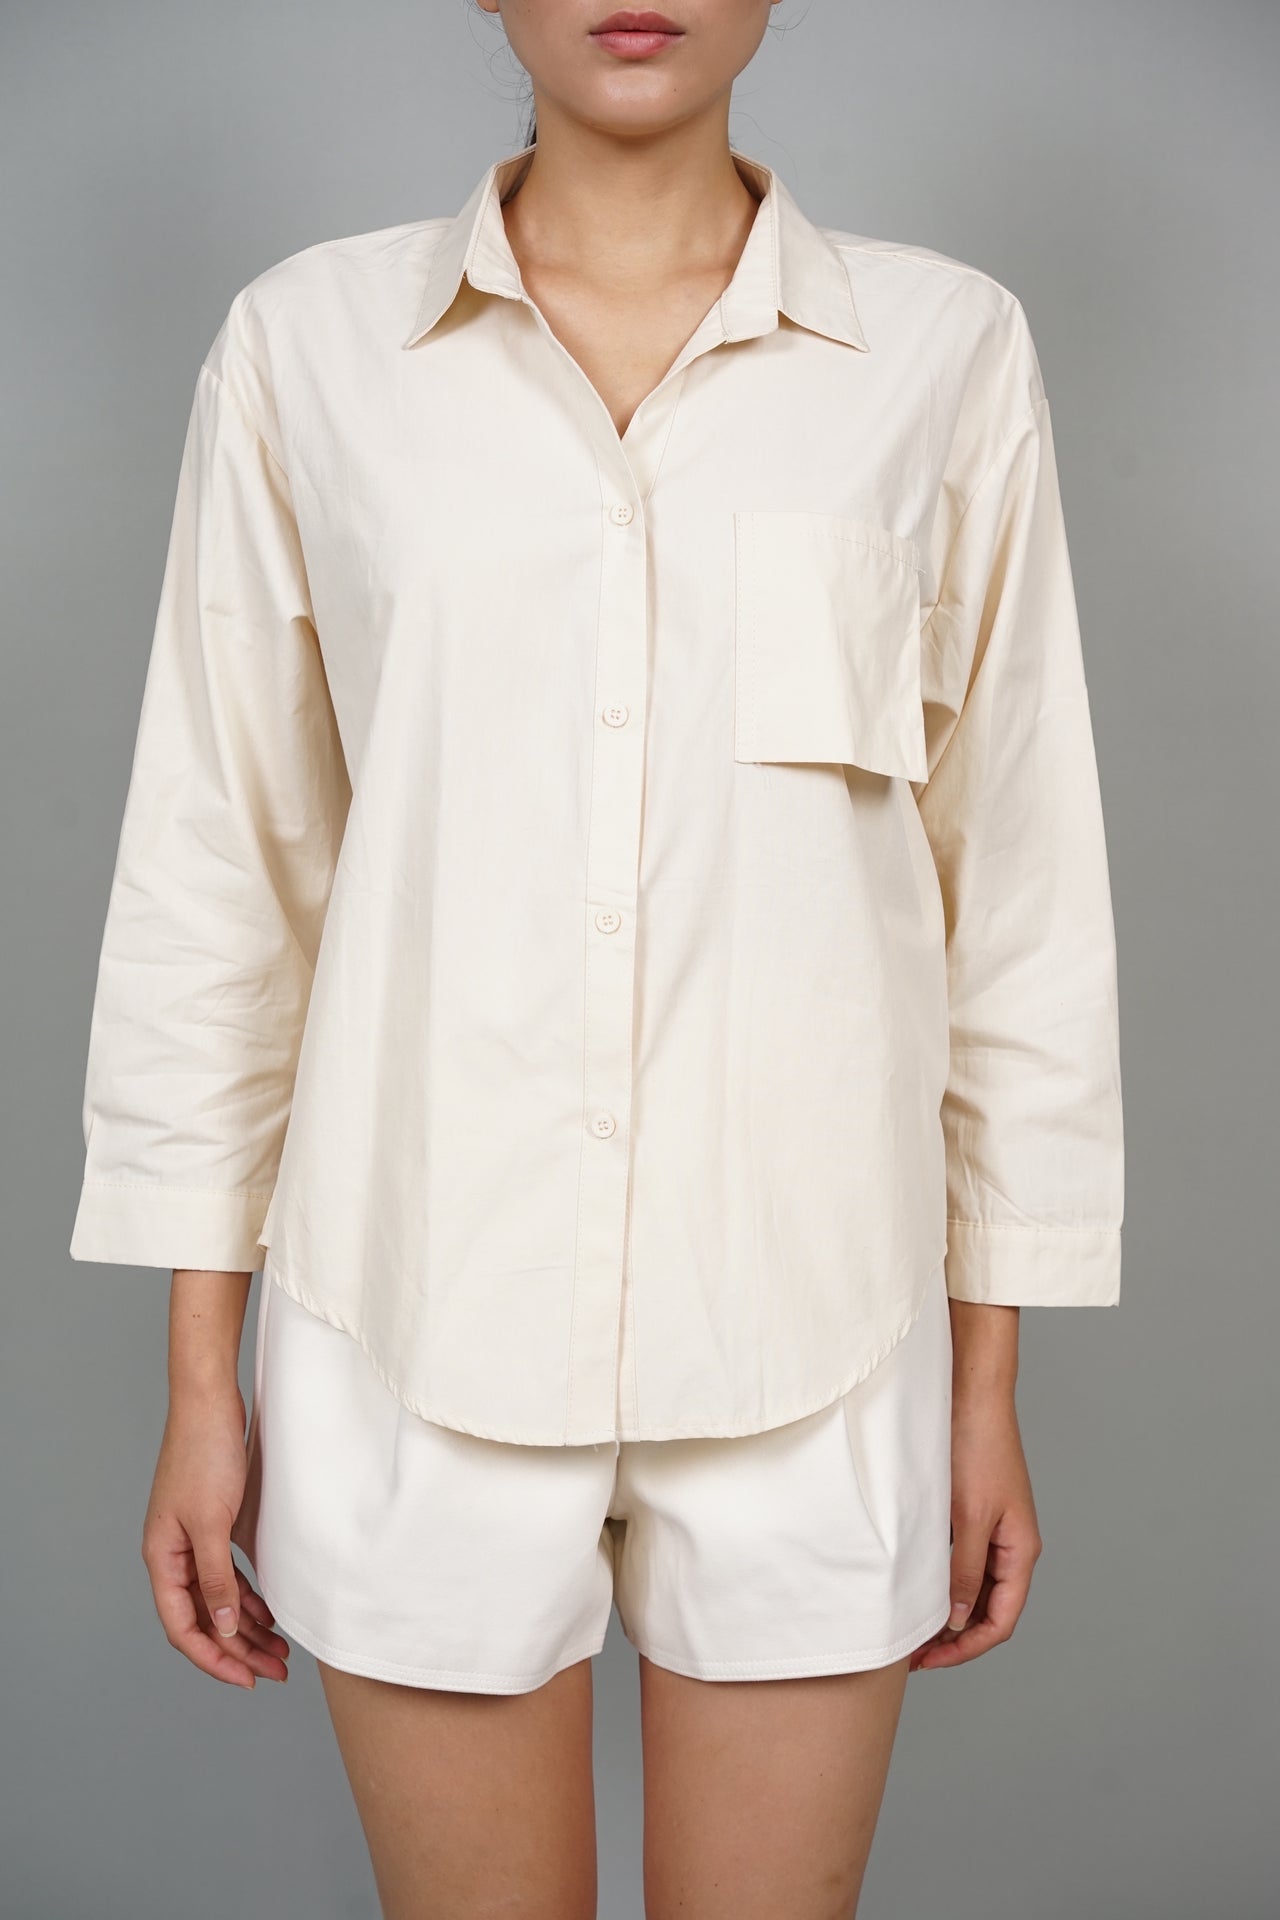 EVERYDAY / Rocco Buttoned Shirt in Ecru